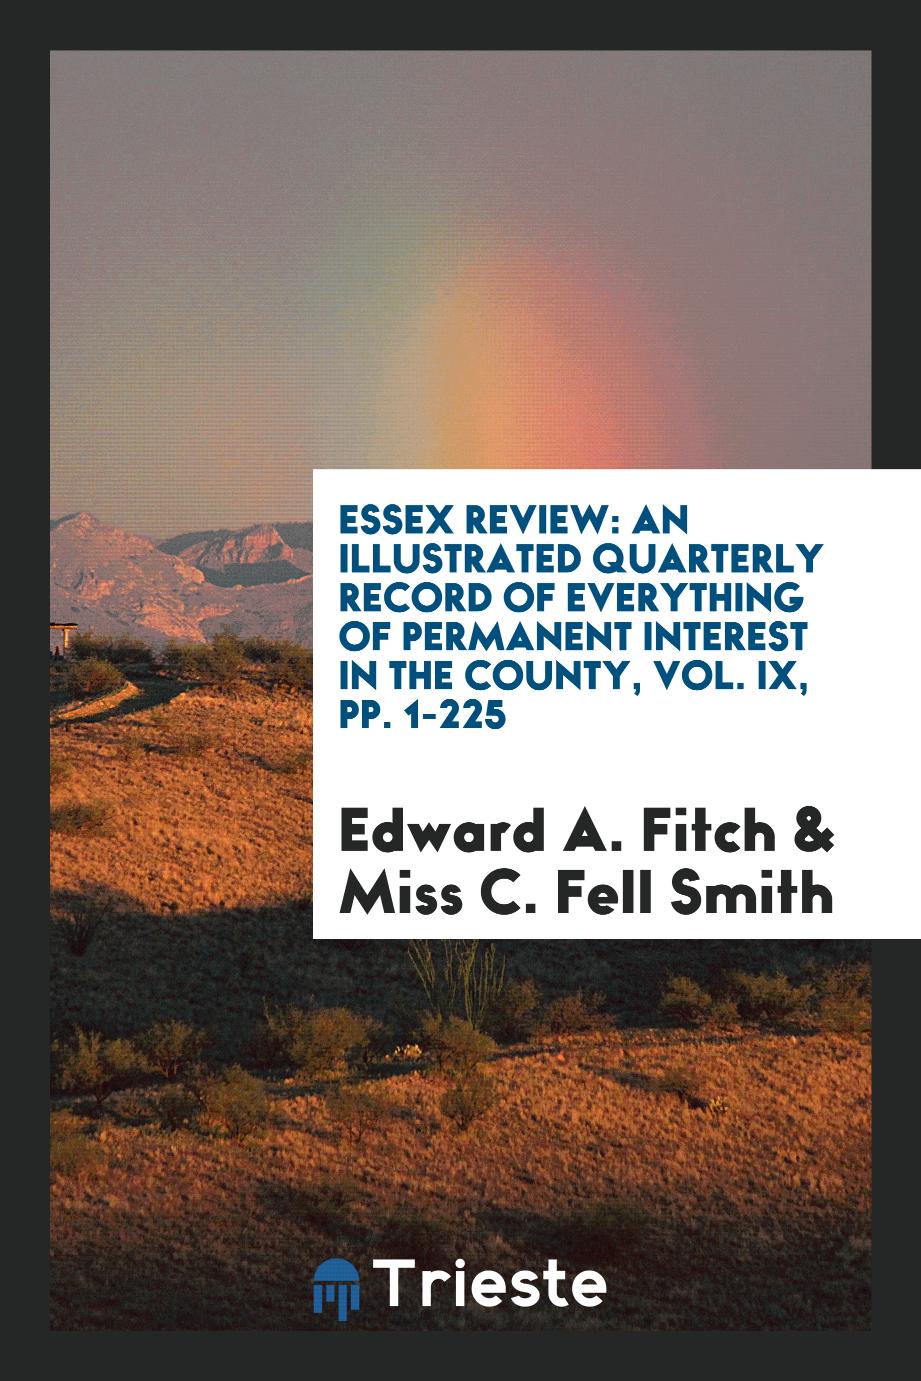 Essex Review: An Illustrated Quarterly Record of Everything of Permanent Interest in the County, Vol. IX, pp. 1-225